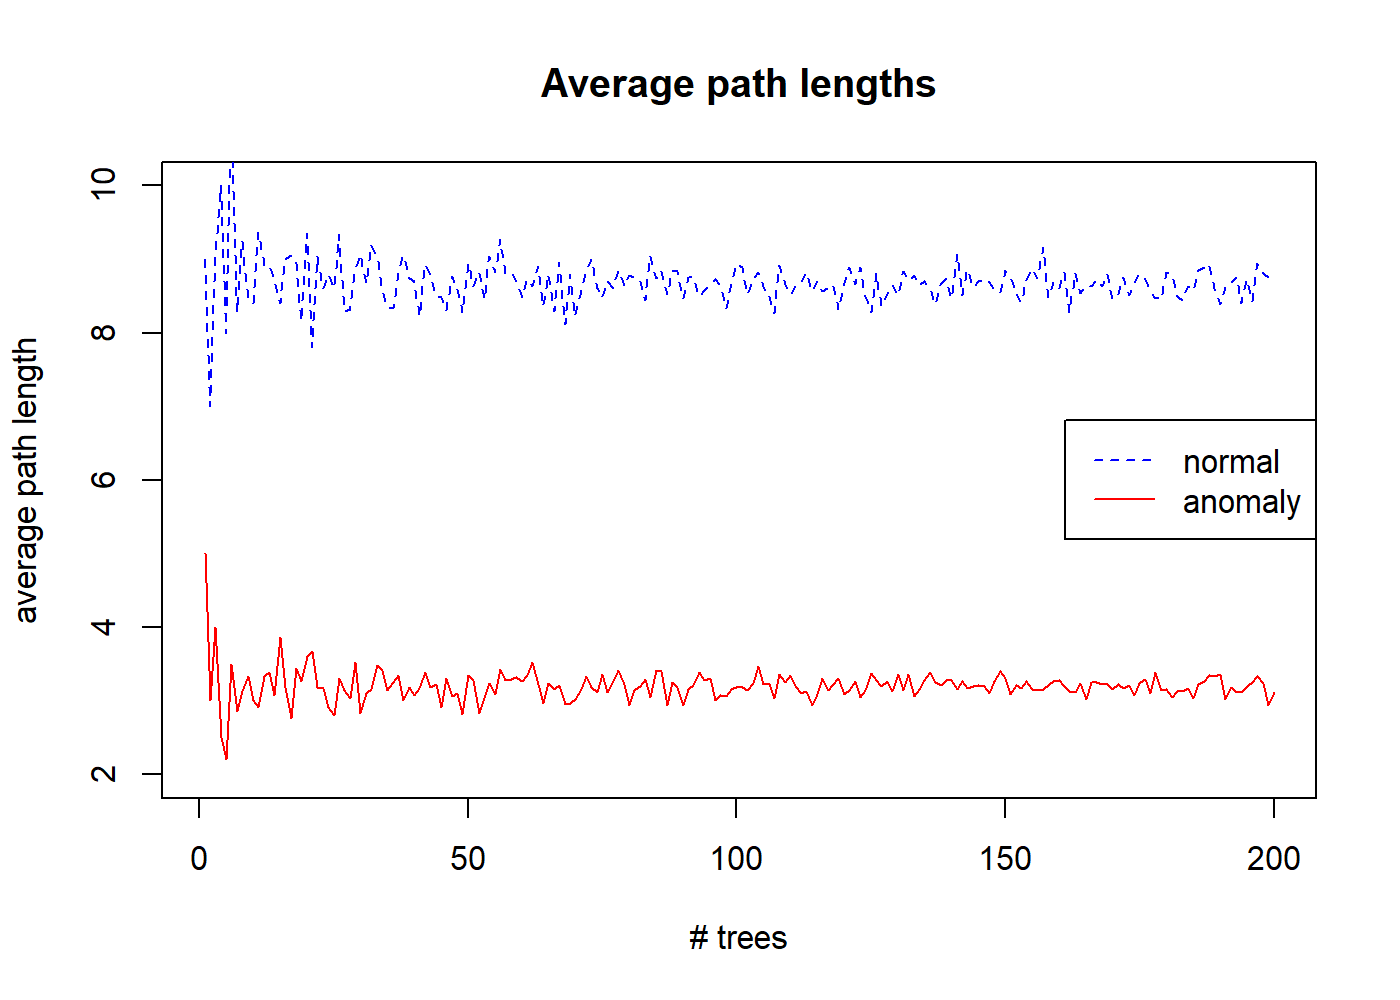 Average path lenghts for increasing number of trees.